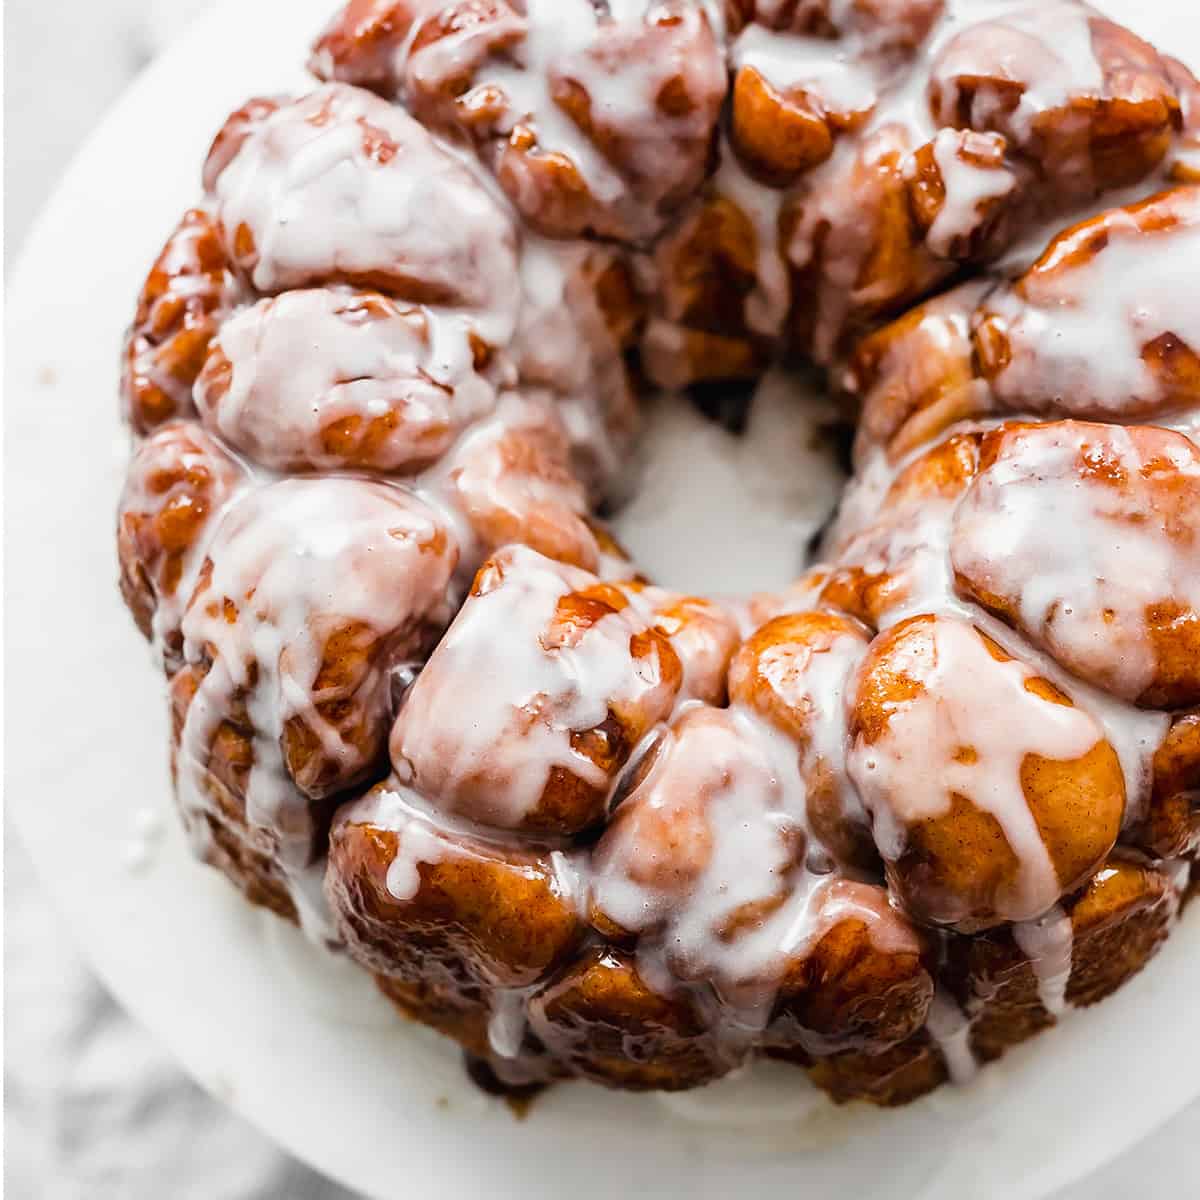 The Best Monkey Bread Recipe covered in a white glaze on a white plate.